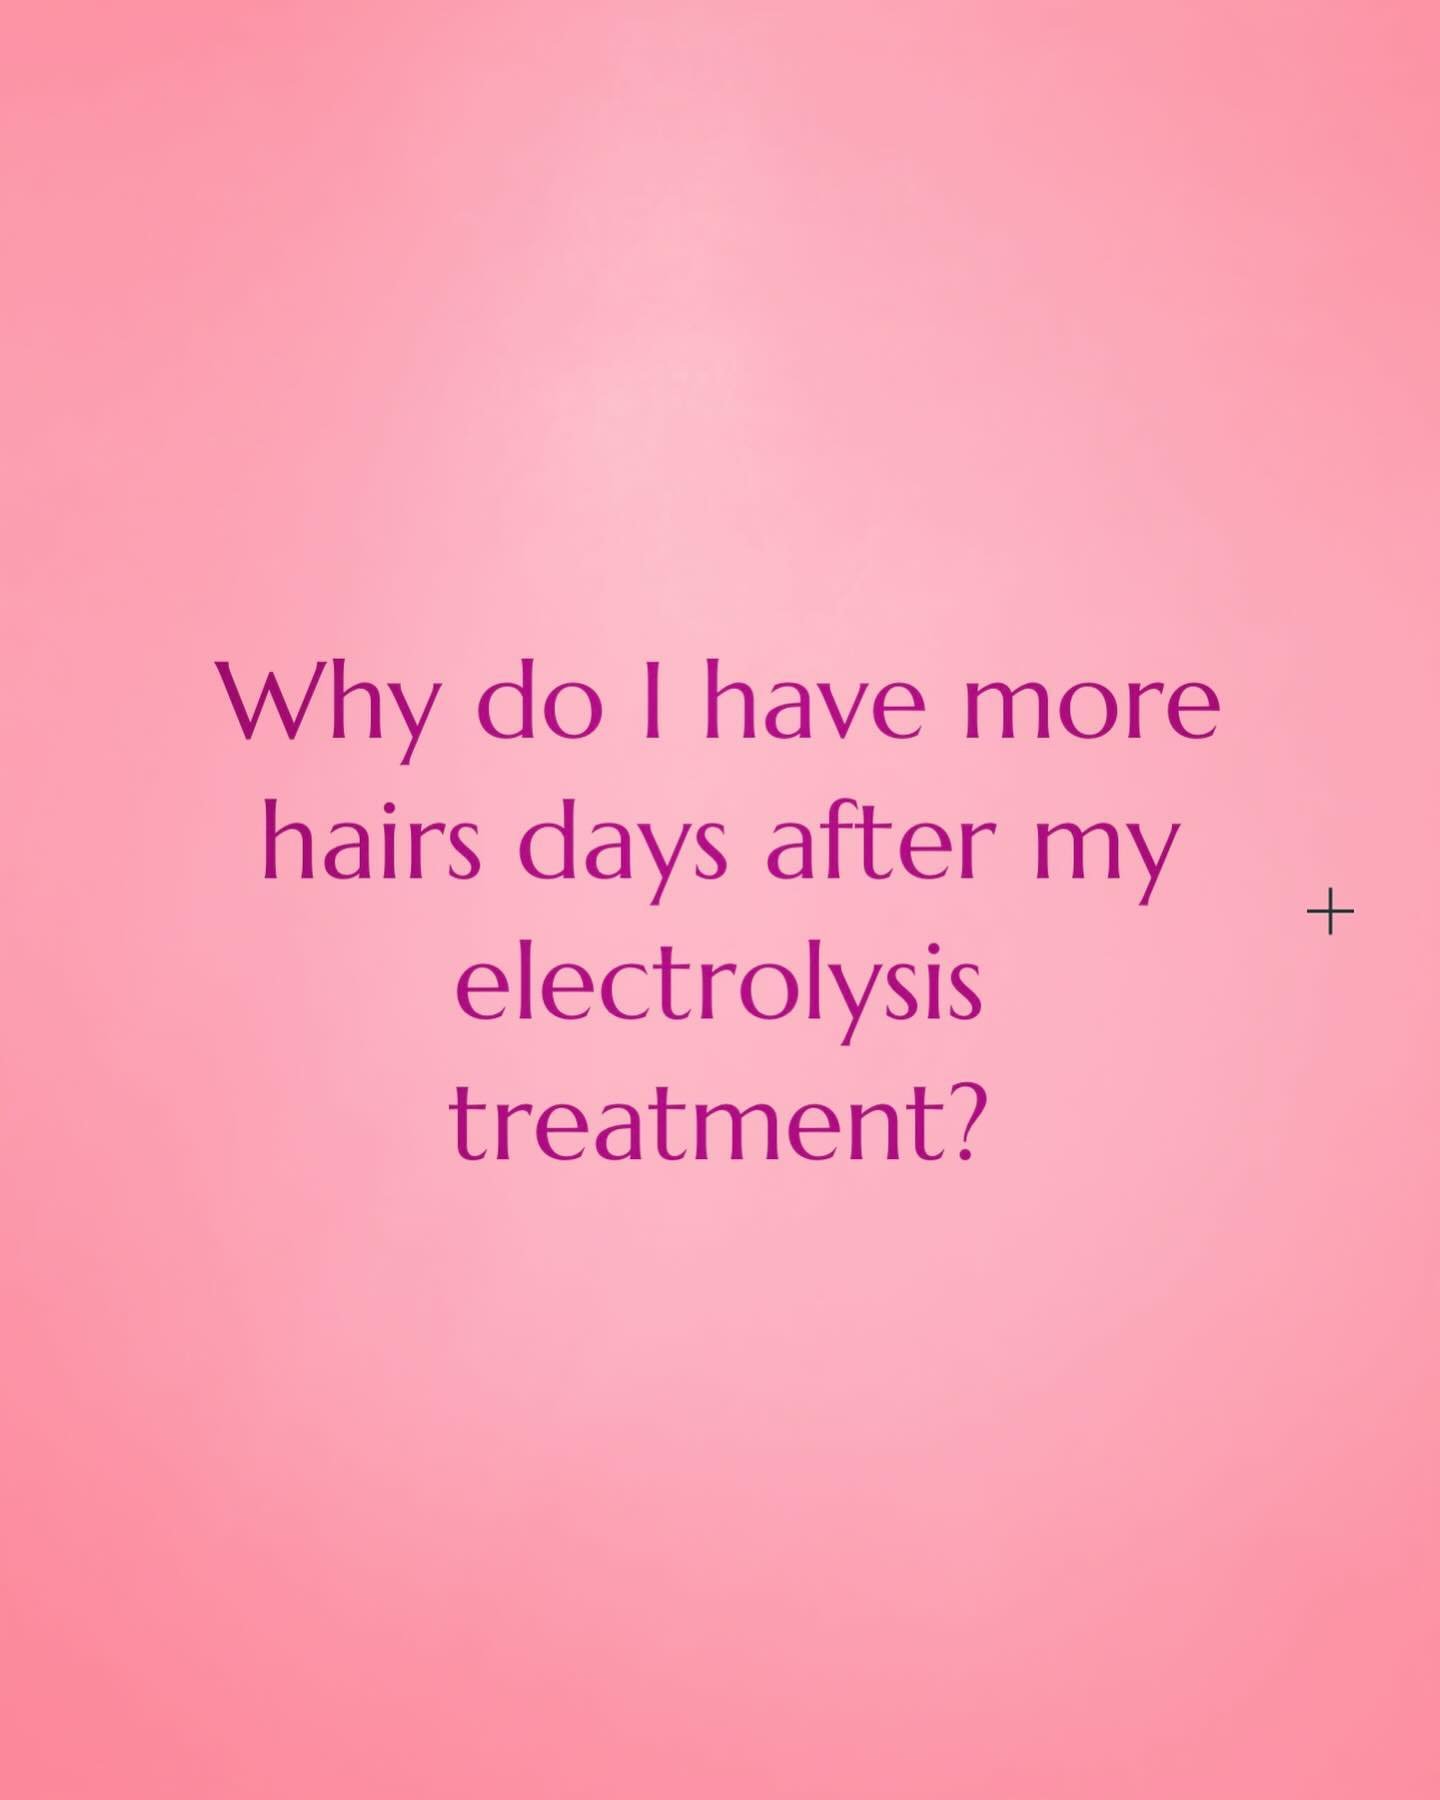 #triviatuesday Some people think they may have received a &ldquo;subpar&rdquo; treatment or may second guess how good their Electrologist is because in the first 1-3 days following their treatment hairs are seen - neither is the case. 

Swipe right f